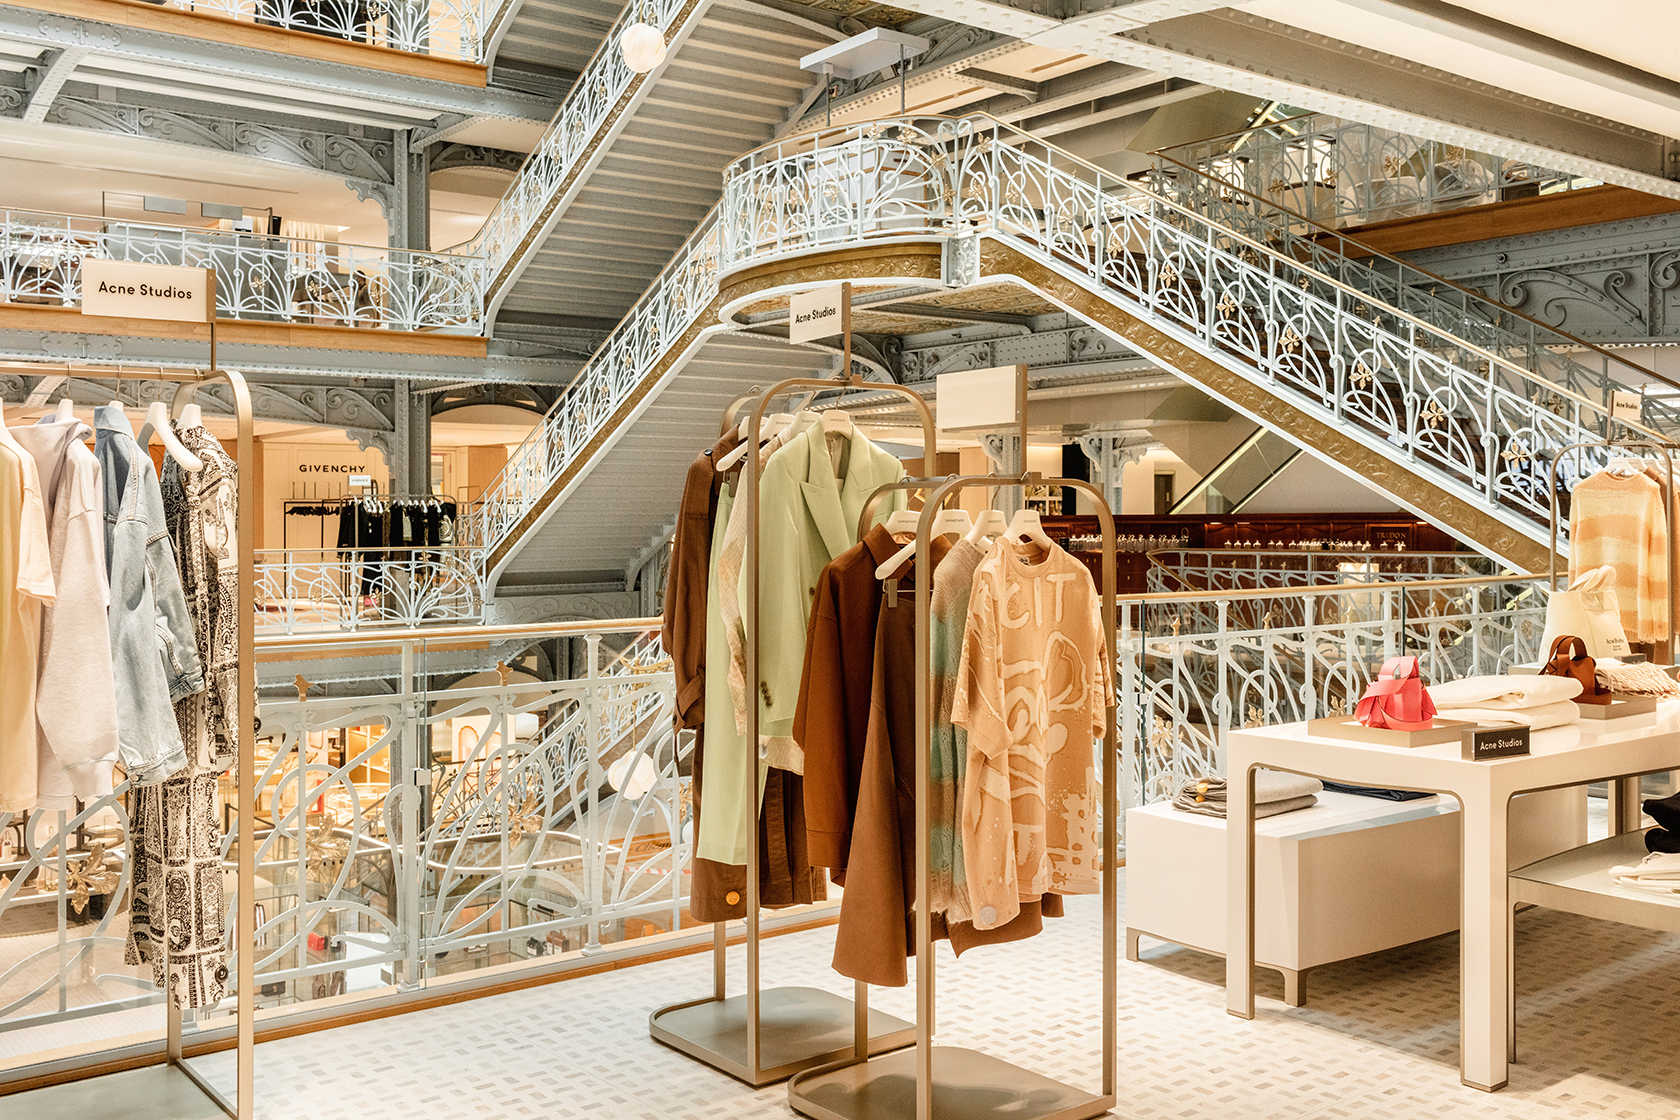 The Best Shopping in Paris Is at Samaritaine